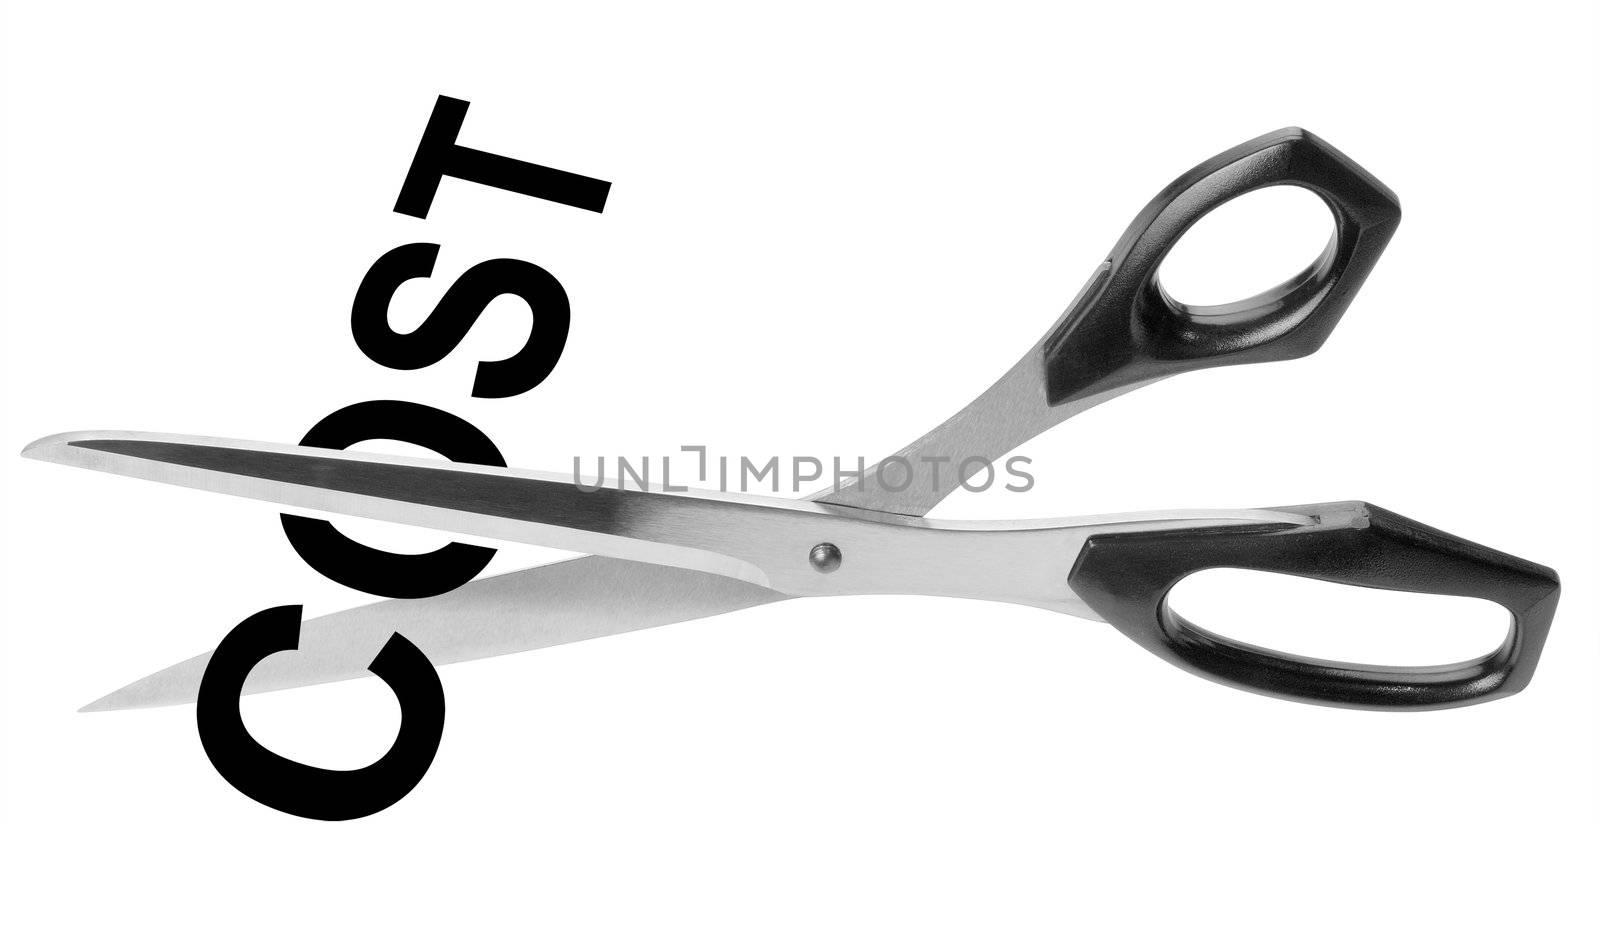 Cost cutting scissors,isolated with clipping path